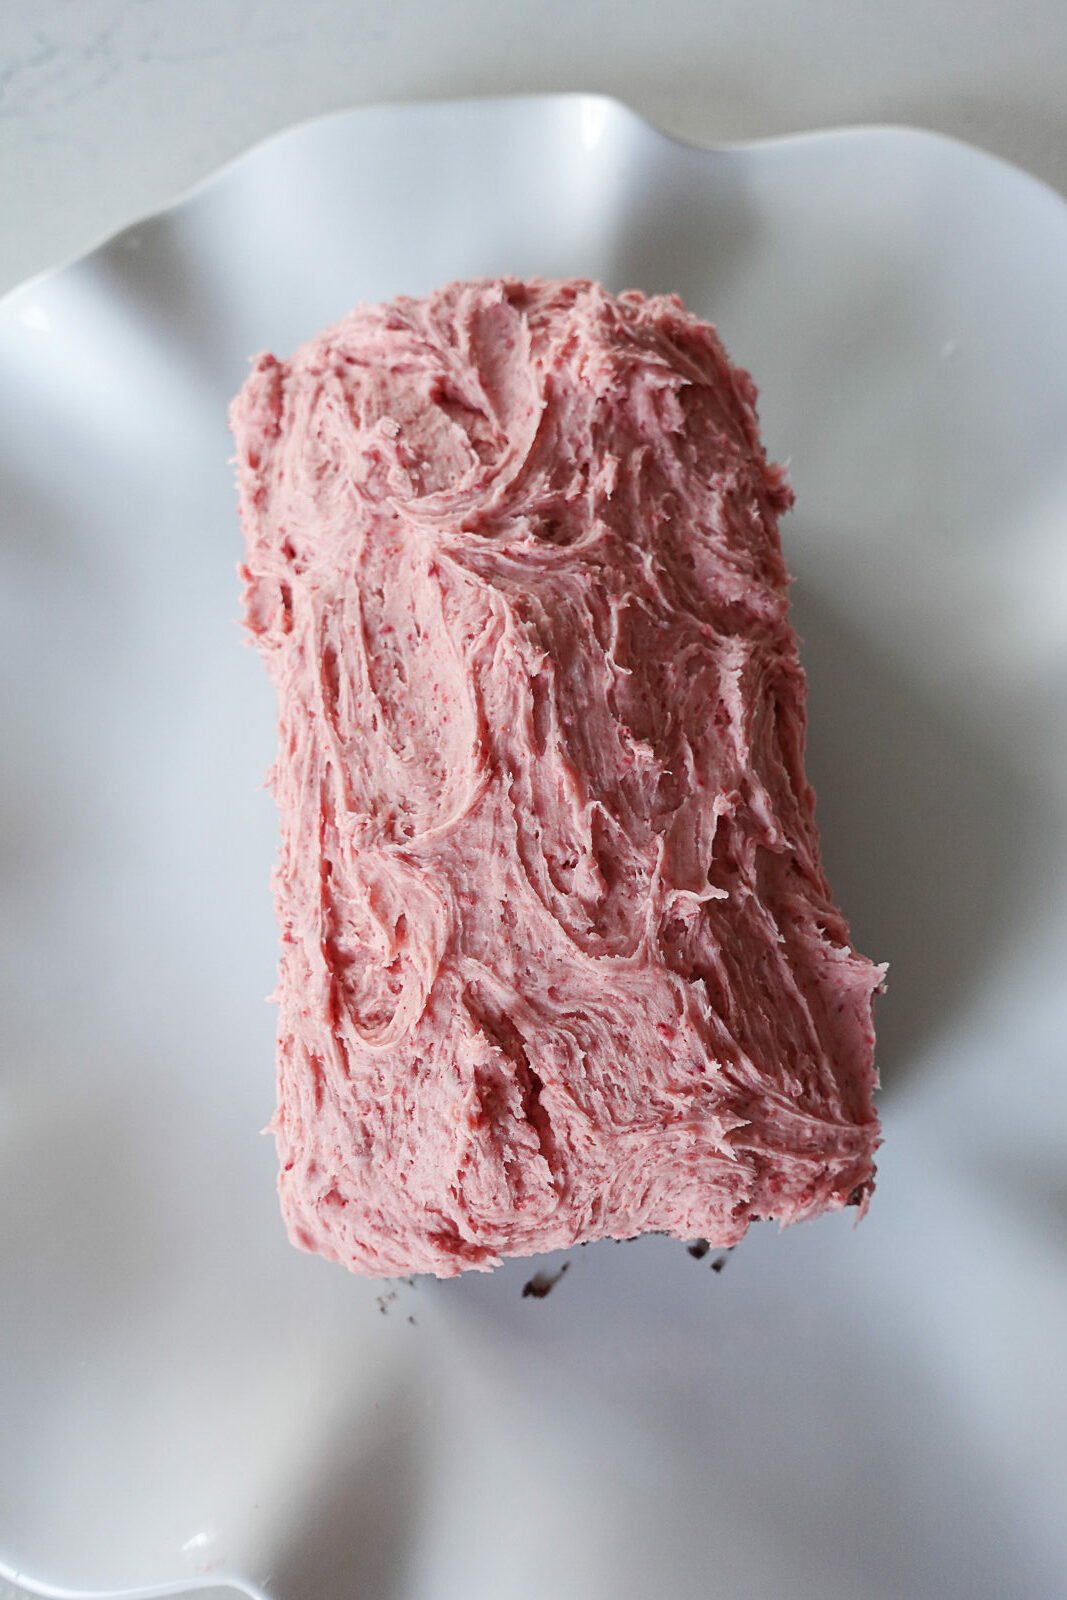 Strawberry Frosting on top of Chocolate Loaf Cake